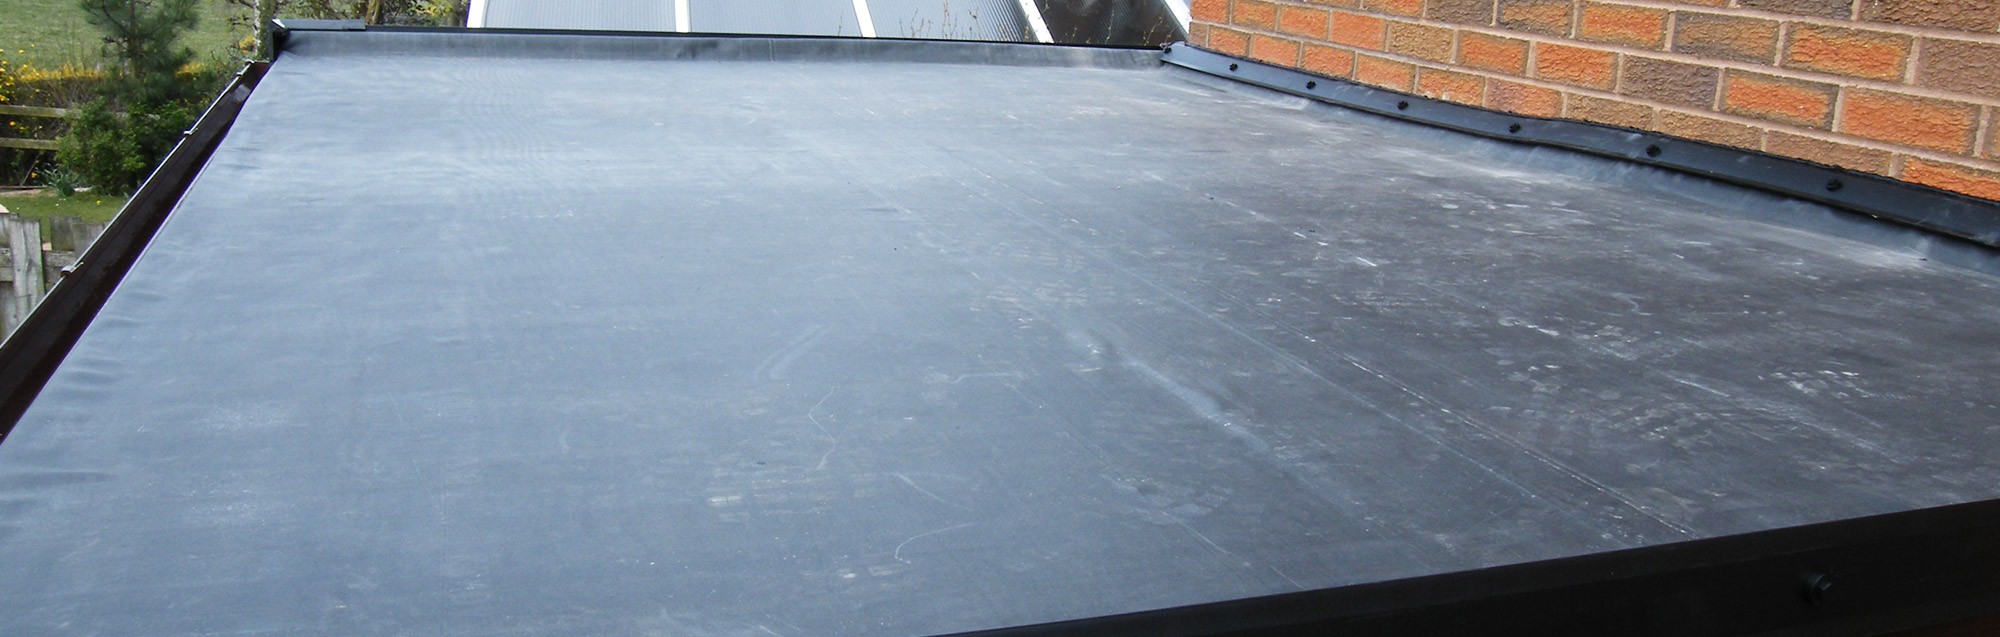 Rubber roof on a garage